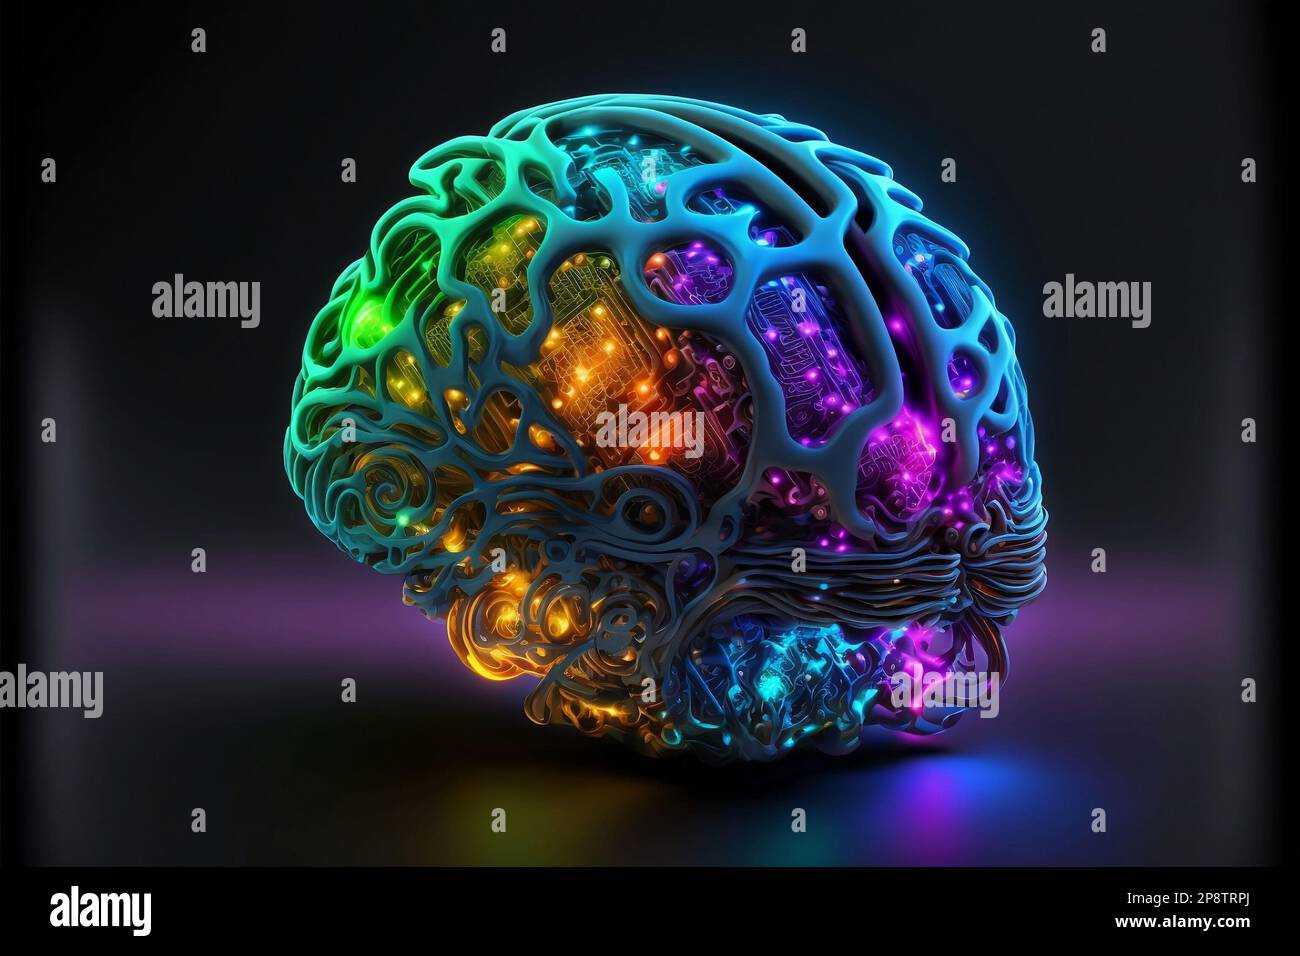 Human Brain As Engineering Processing Machine Sketch Concept Vector  Illustration Royalty Free SVG, Cliparts, Vectors, and Stock Illustration.  Image 31726207.